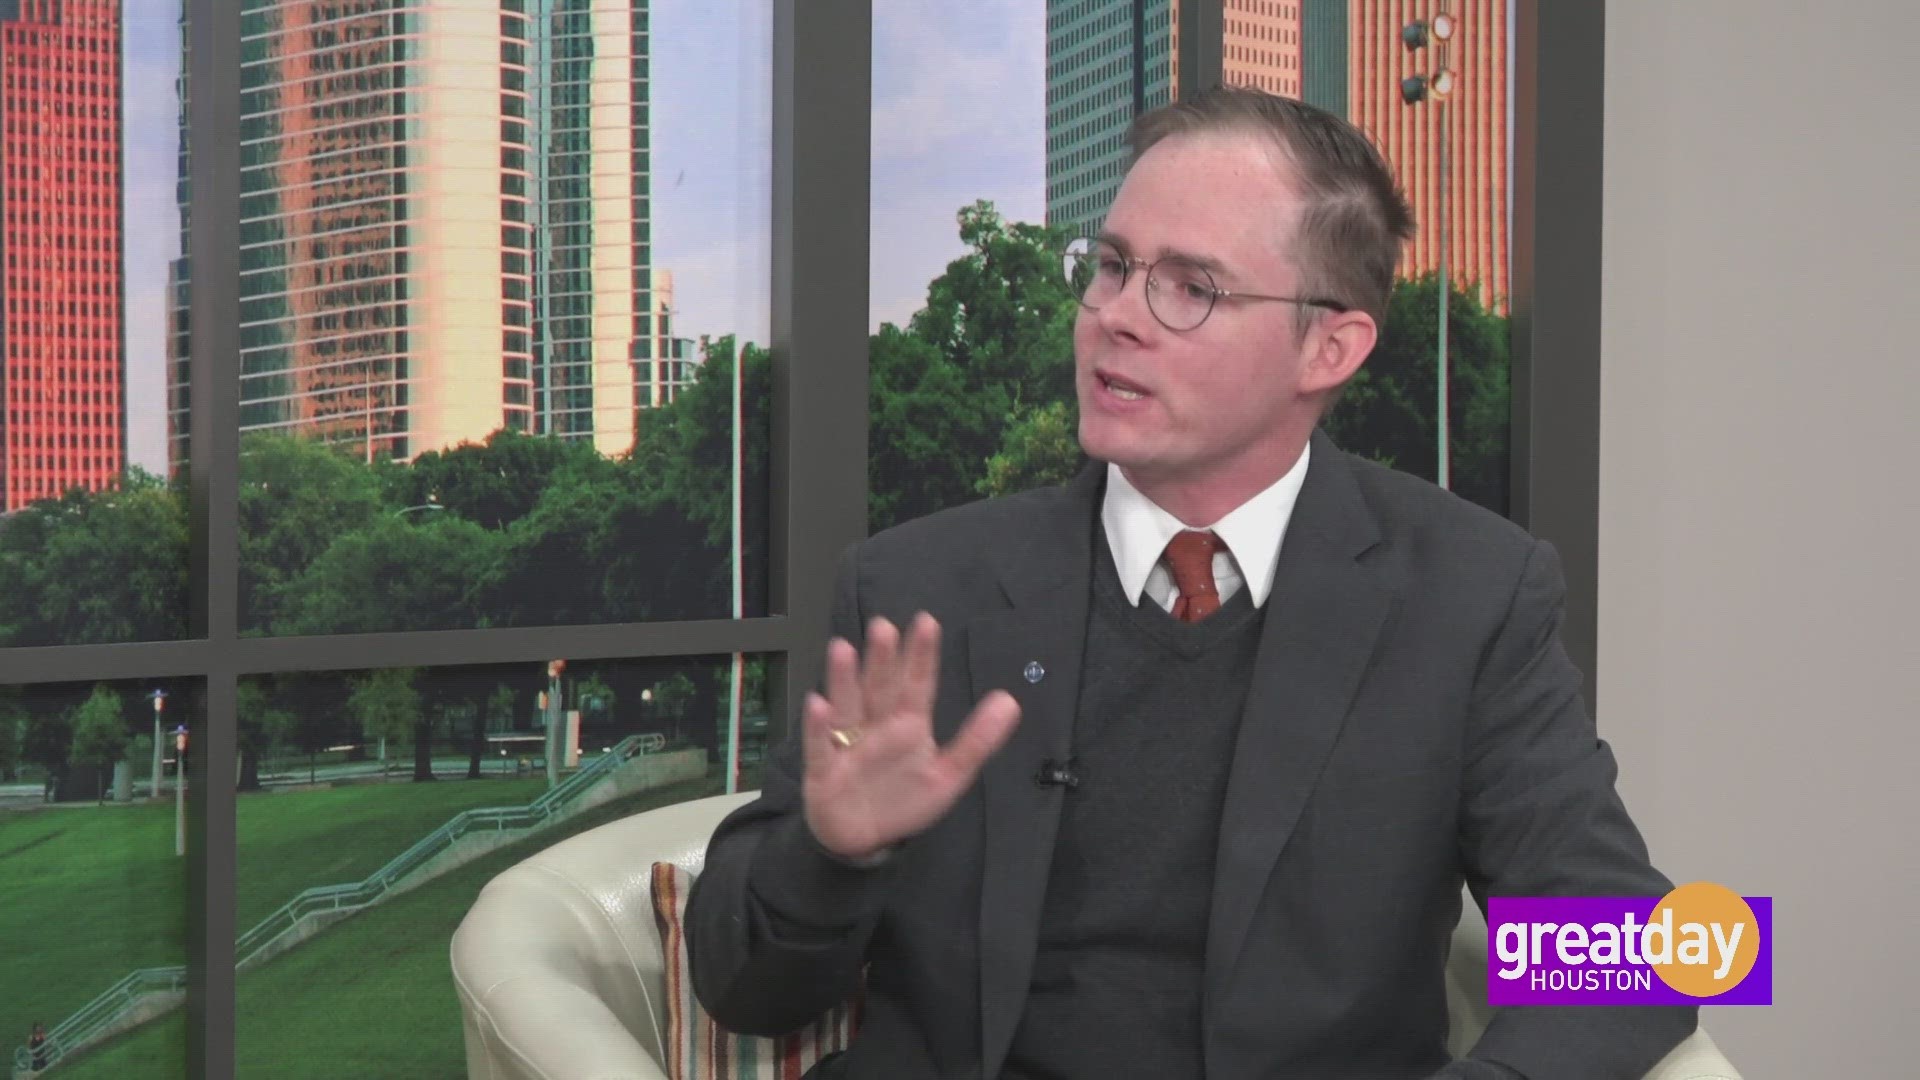 Funeral Director & Embalmer, Clay Dippel, shares how funeral homes help to strike the balance between closure to a loss while celebrating a person's life.